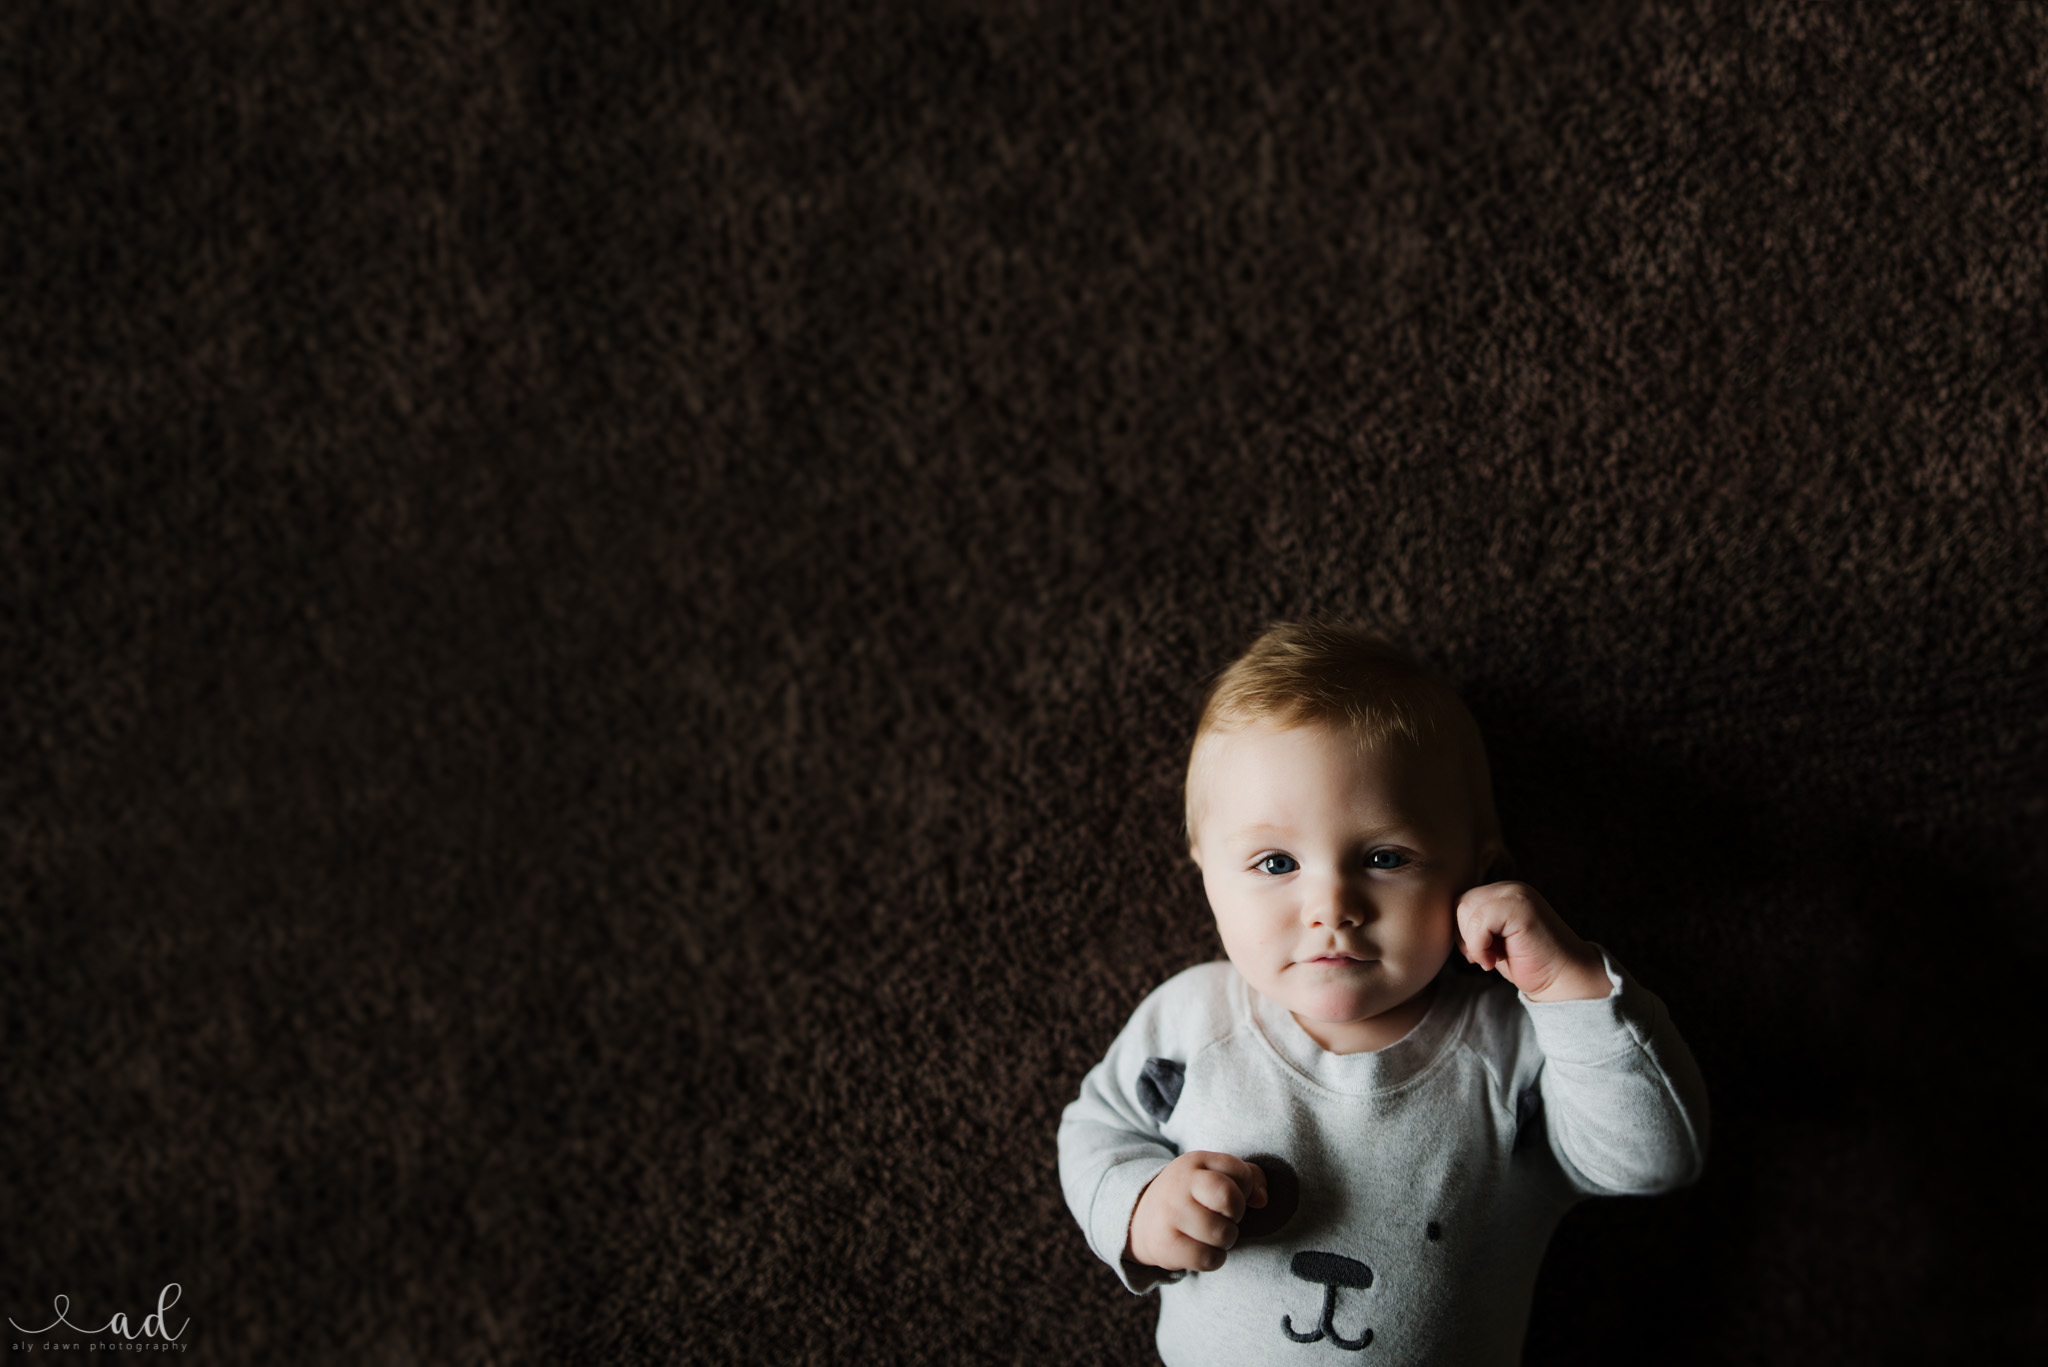 Aly Dawn Photography 5 Tips to Getting Better Pictures of Your Infant